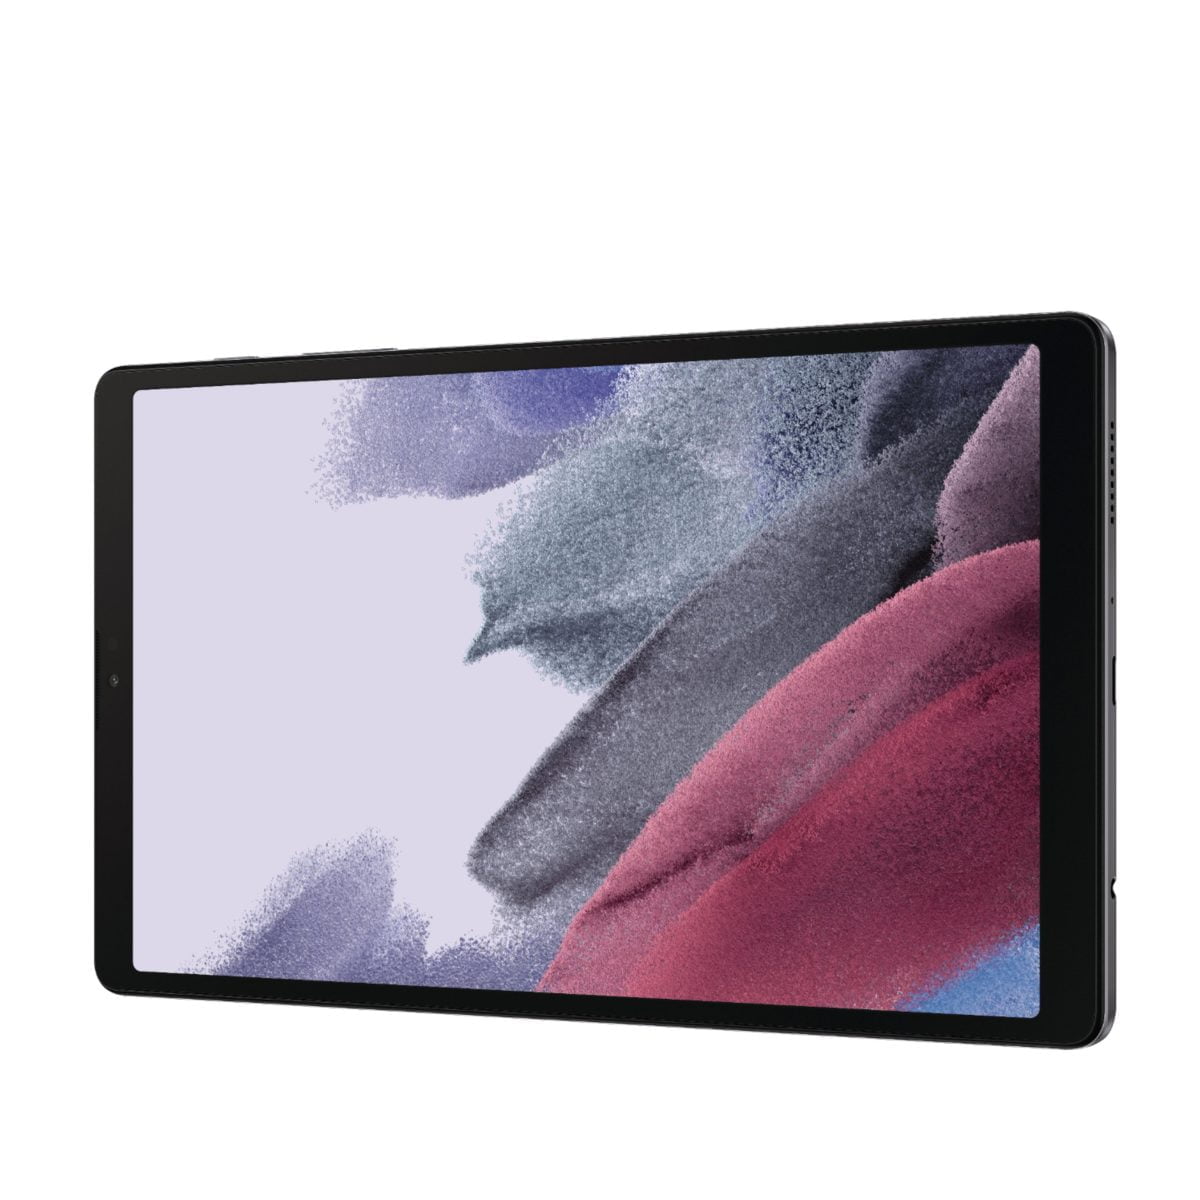 6464584Cv13D Scaled Samsung &Lt;H1&Gt;Samsung Galaxy Tab A7 Lite 32Gb - ‎Dark Gray&Lt;/H1&Gt; Meet The Device Your Whole Family Will Love: Samsung Galaxy Tab A7 Lite, The Tablet That'S Made To Be Shared. With Its Compact 8.7&Quot; Screen, Galaxy Tab A7 Lite Is Perfectly Sized For Entertainment On The Go. Its Sturdy Metal Frame Is Built To Be Brought Along From The Living Room To Your Beach Vacation, Or Wherever You Want To Take It. Galaxy Tab A7 Lite Comes With Access To Hours Of Ad-Free Youtube Premium And Samsung Tv At No Extra Charge So You Can Keep The Family Happy Without Annoying Interruptions. Plus, With A Powerful Processor For Fast Streaming And Plenty Of Storage For Your Favorite Files, Galaxy Tab A7 Lite Simplifies Entertainment Needs For Everyone Under Your Roof. Samsung Galaxy Tab Samsung Galaxy Tab A7 Lite 32Gb Wi-Fi - ‎Dark Gray